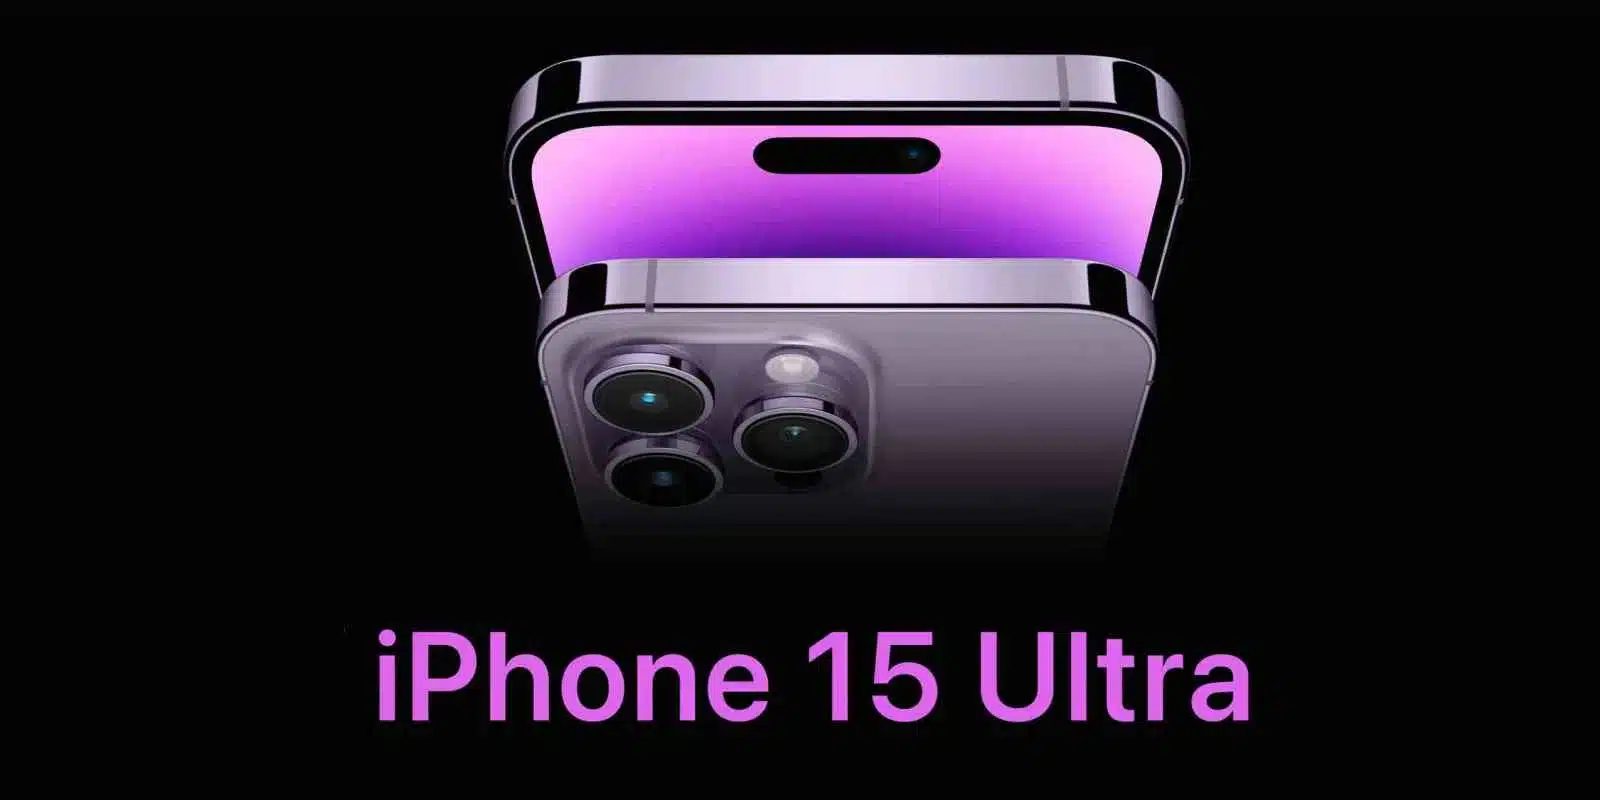 Apple iPhone 15 and 15 Plus will be equipped with 48MP camera like Pro models, know possible features